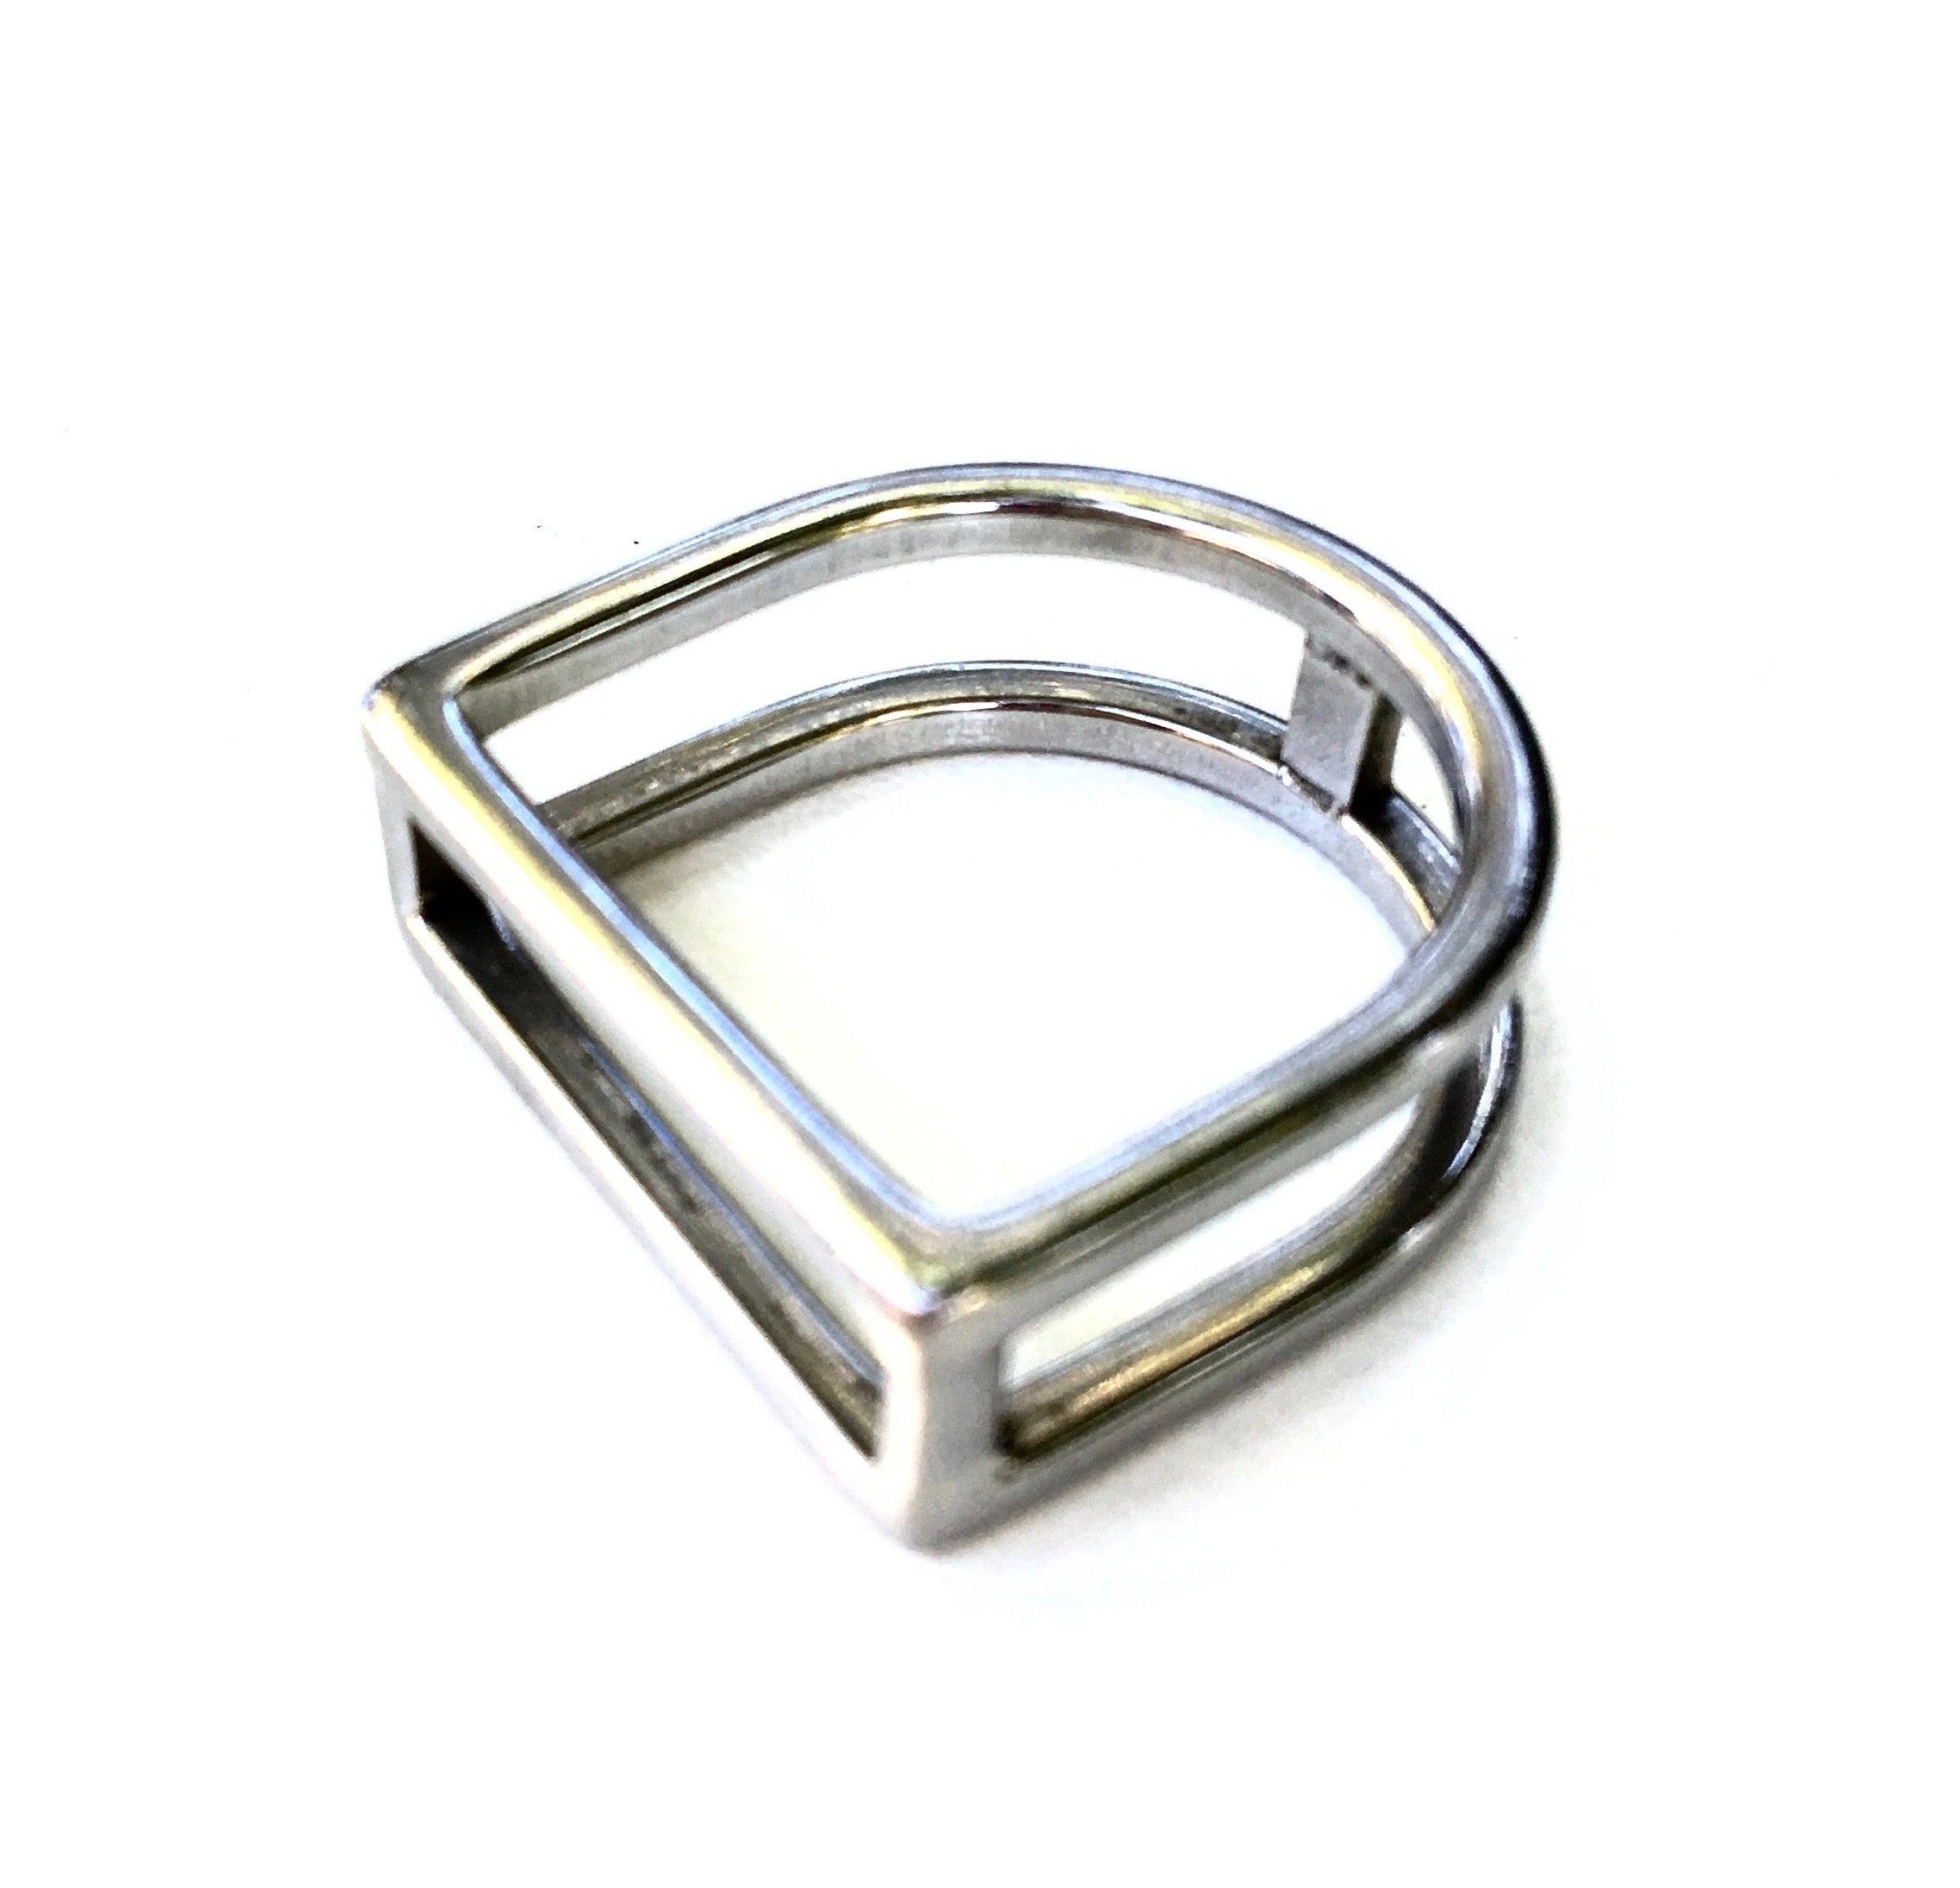 STIRRUP RING | Equestrian Style Ring | Stainless Steel Jewelry - AtelierCG™